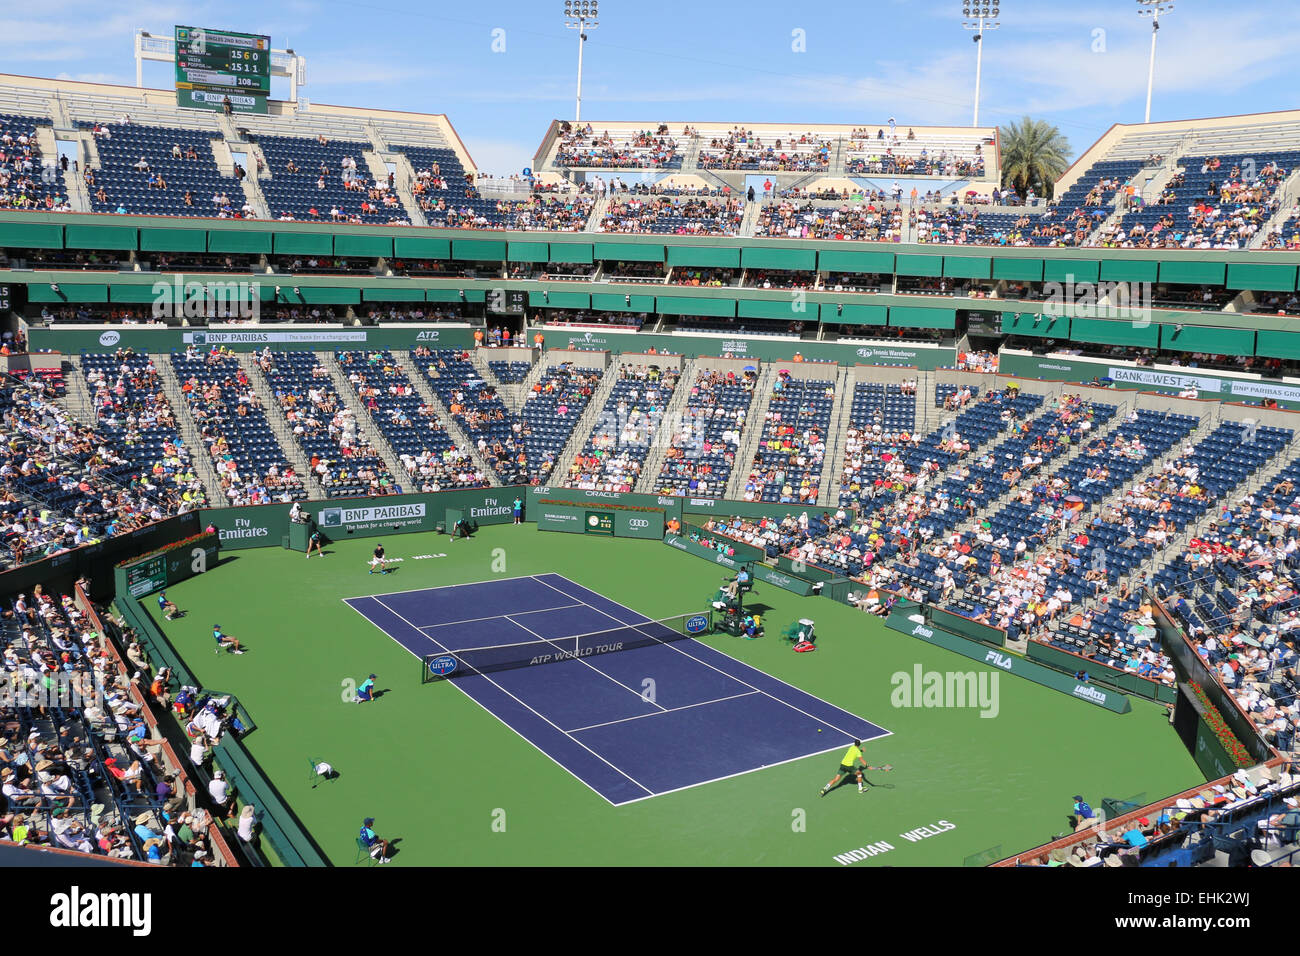 Tennis Arena High Resolution Stock Photography and Images - Alamy